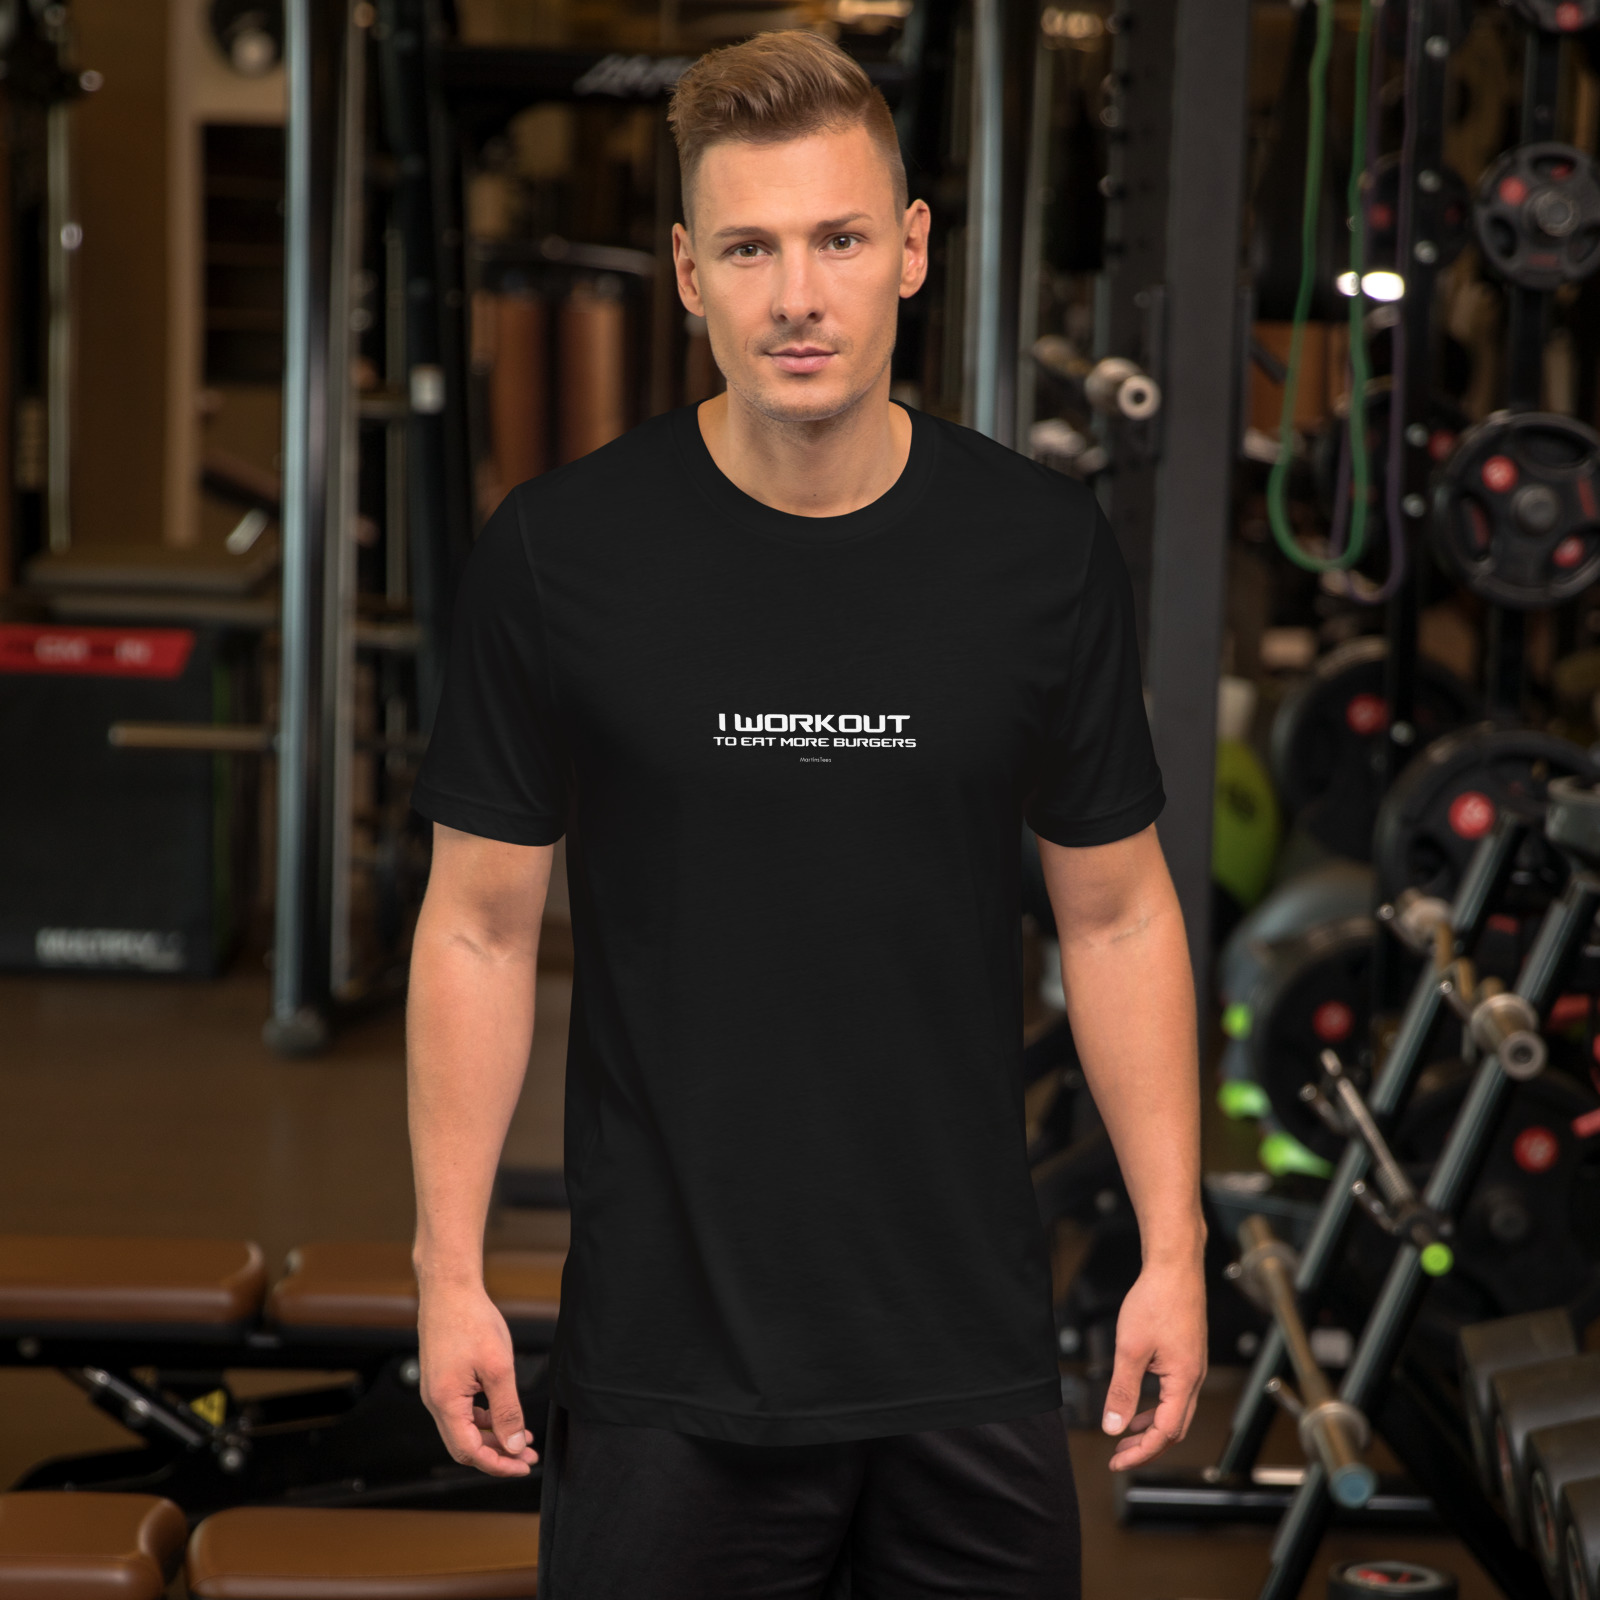 T-shirt: I WORKOUT - TO EAT MORE BURGERS